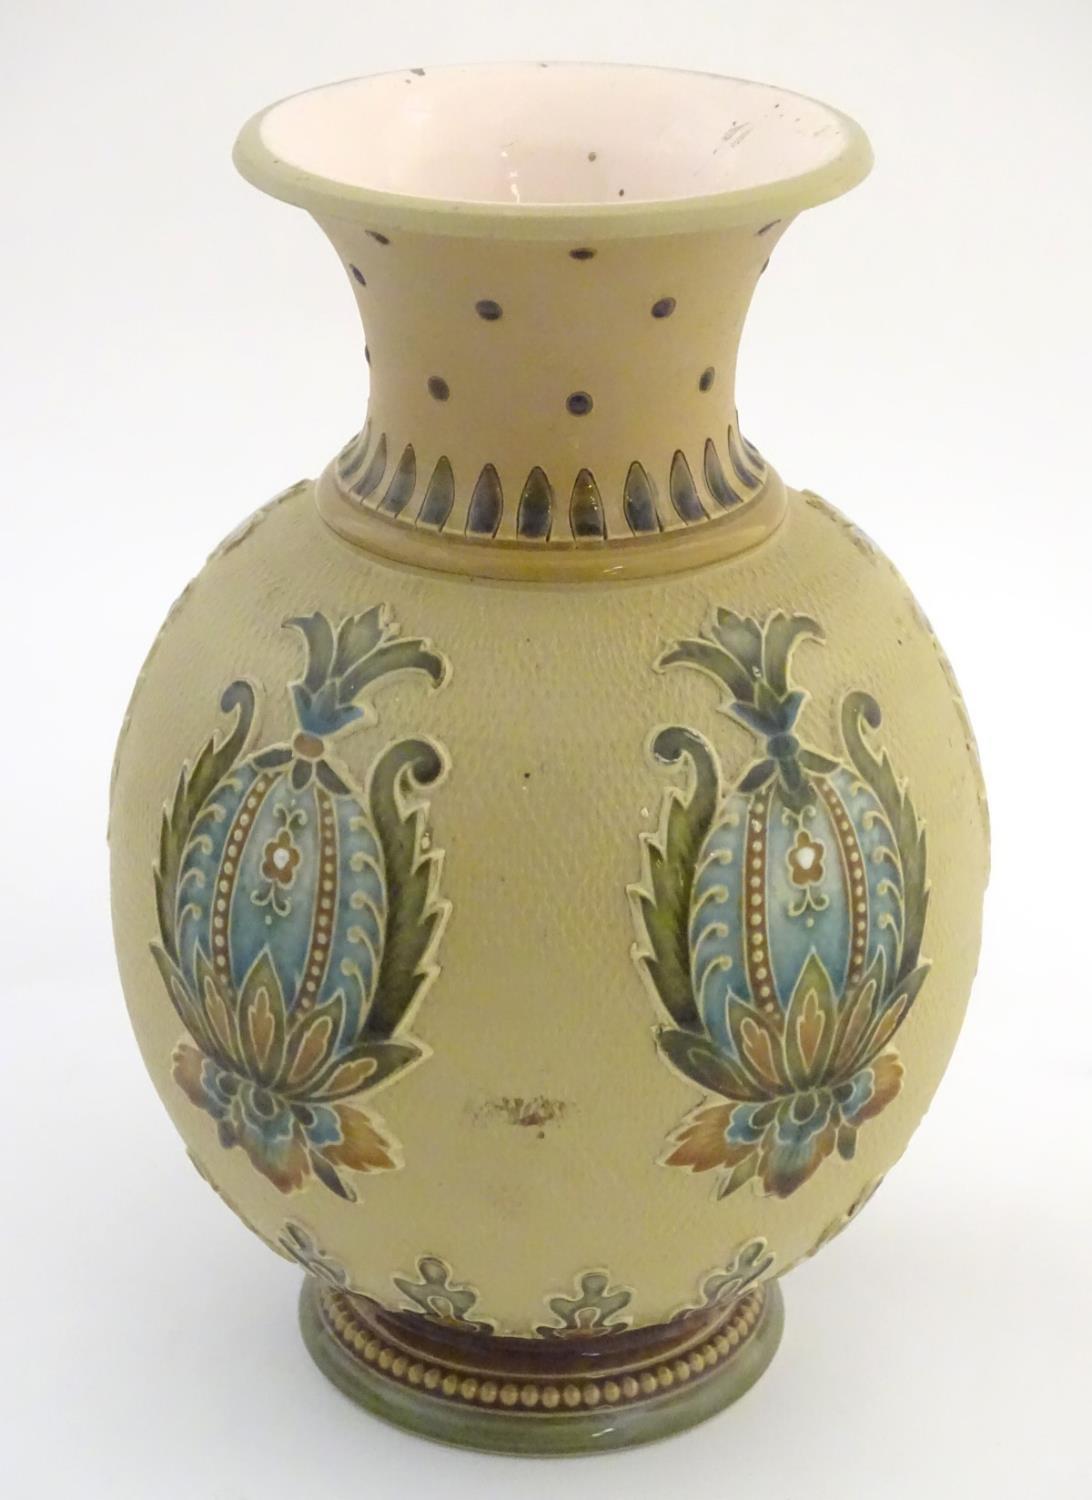 A Mettlach vase with a flared rim and bulbous body, decorated with sylised floral and foliate motifs